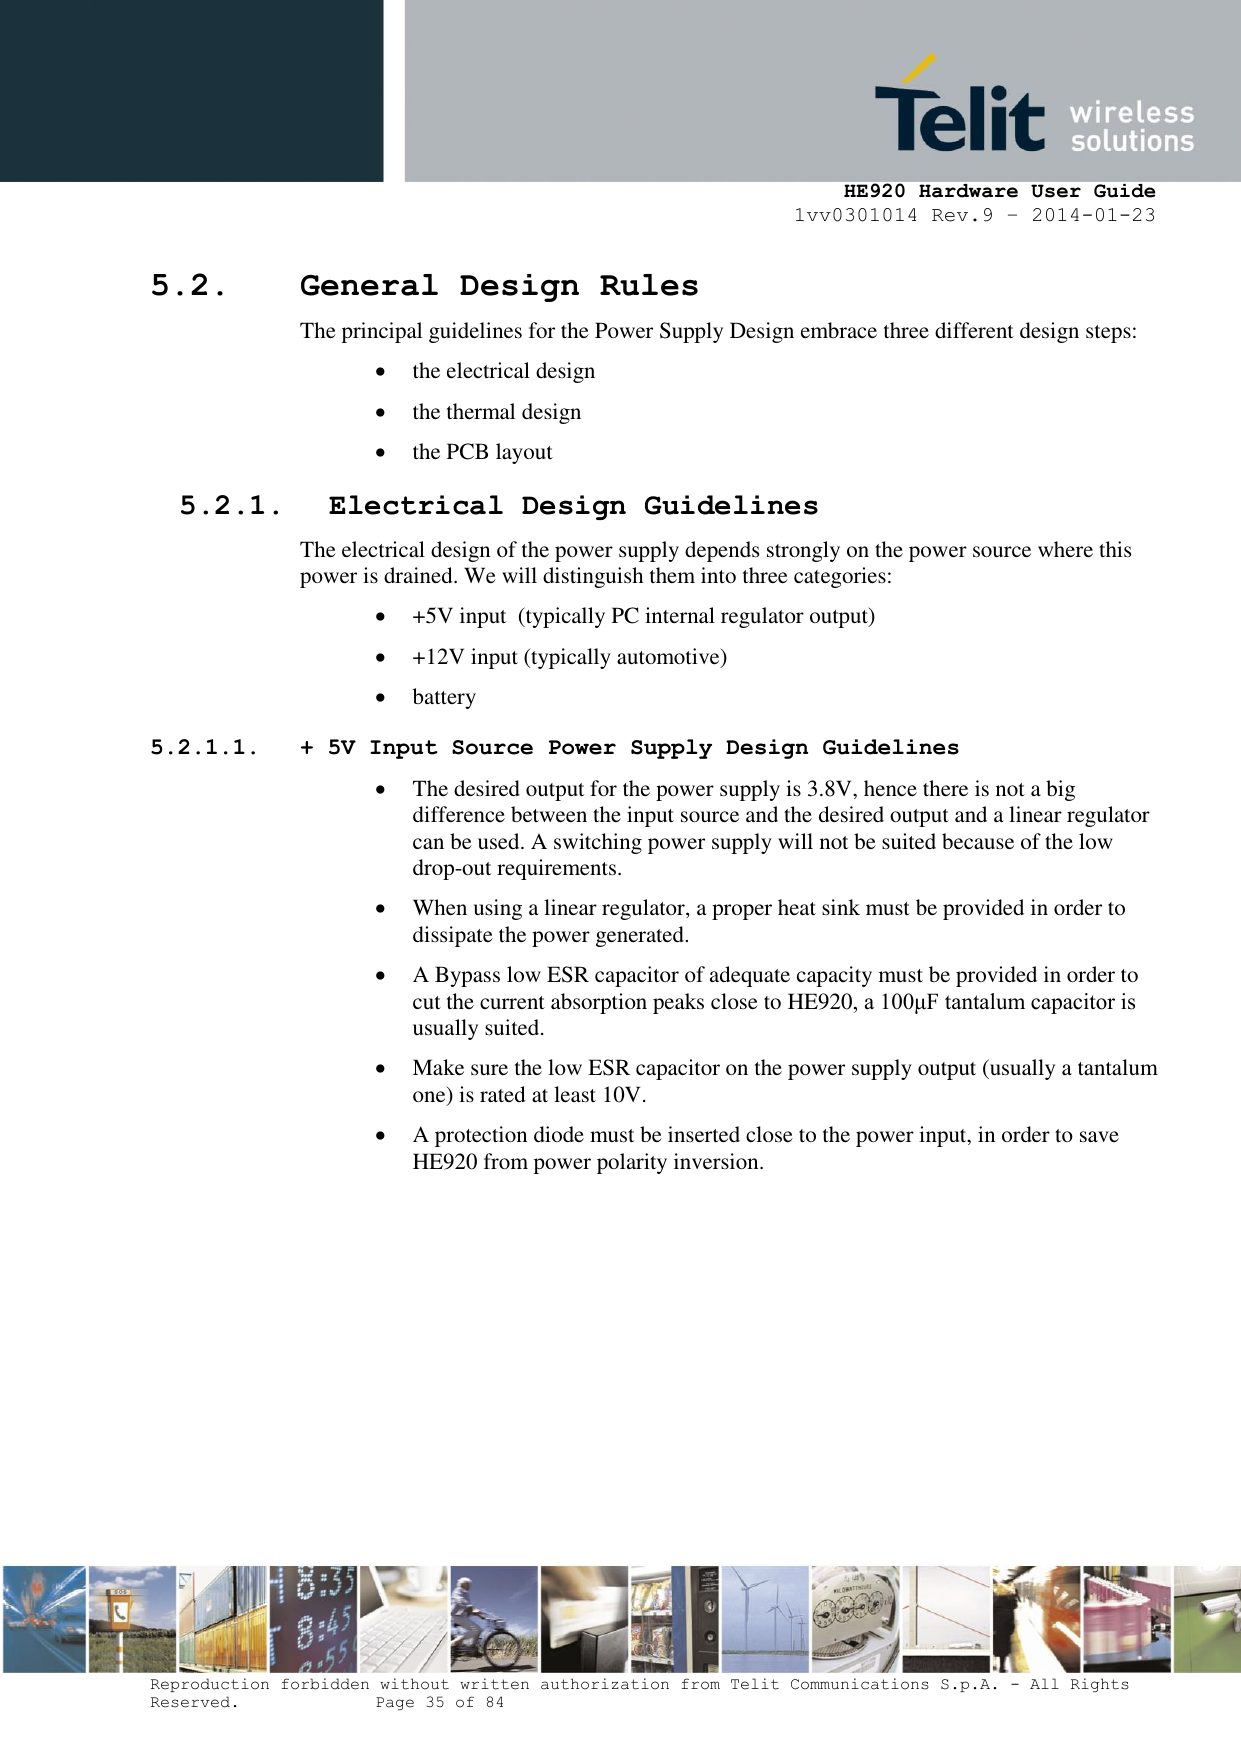     HE920 Hardware User Guide 1vv0301014 Rev.9 – 2014-01-23 Reproduction forbidden without written authorization from Telit Communications S.p.A. - All Rights Reserved.    Page 35 of 84  5.2. General Design Rules The principal guidelines for the Power Supply Design embrace three different design steps:  the electrical design  the thermal design  the PCB layout 5.2.1. Electrical Design Guidelines The electrical design of the power supply depends strongly on the power source where this power is drained. We will distinguish them into three categories:  +5V input  (typically PC internal regulator output)  +12V input (typically automotive)  battery 5.2.1.1. + 5V Input Source Power Supply Design Guidelines  The desired output for the power supply is 3.8V, hence there is not a big difference between the input source and the desired output and a linear regulator can be used. A switching power supply will not be suited because of the low drop-out requirements.  When using a linear regulator, a proper heat sink must be provided in order to dissipate the power generated.  A Bypass low ESR capacitor of adequate capacity must be provided in order to cut the current absorption peaks close to HE920, a 100μF tantalum capacitor is usually suited.  Make sure the low ESR capacitor on the power supply output (usually a tantalum one) is rated at least 10V.  A protection diode must be inserted close to the power input, in order to save HE920 from power polarity inversion.       